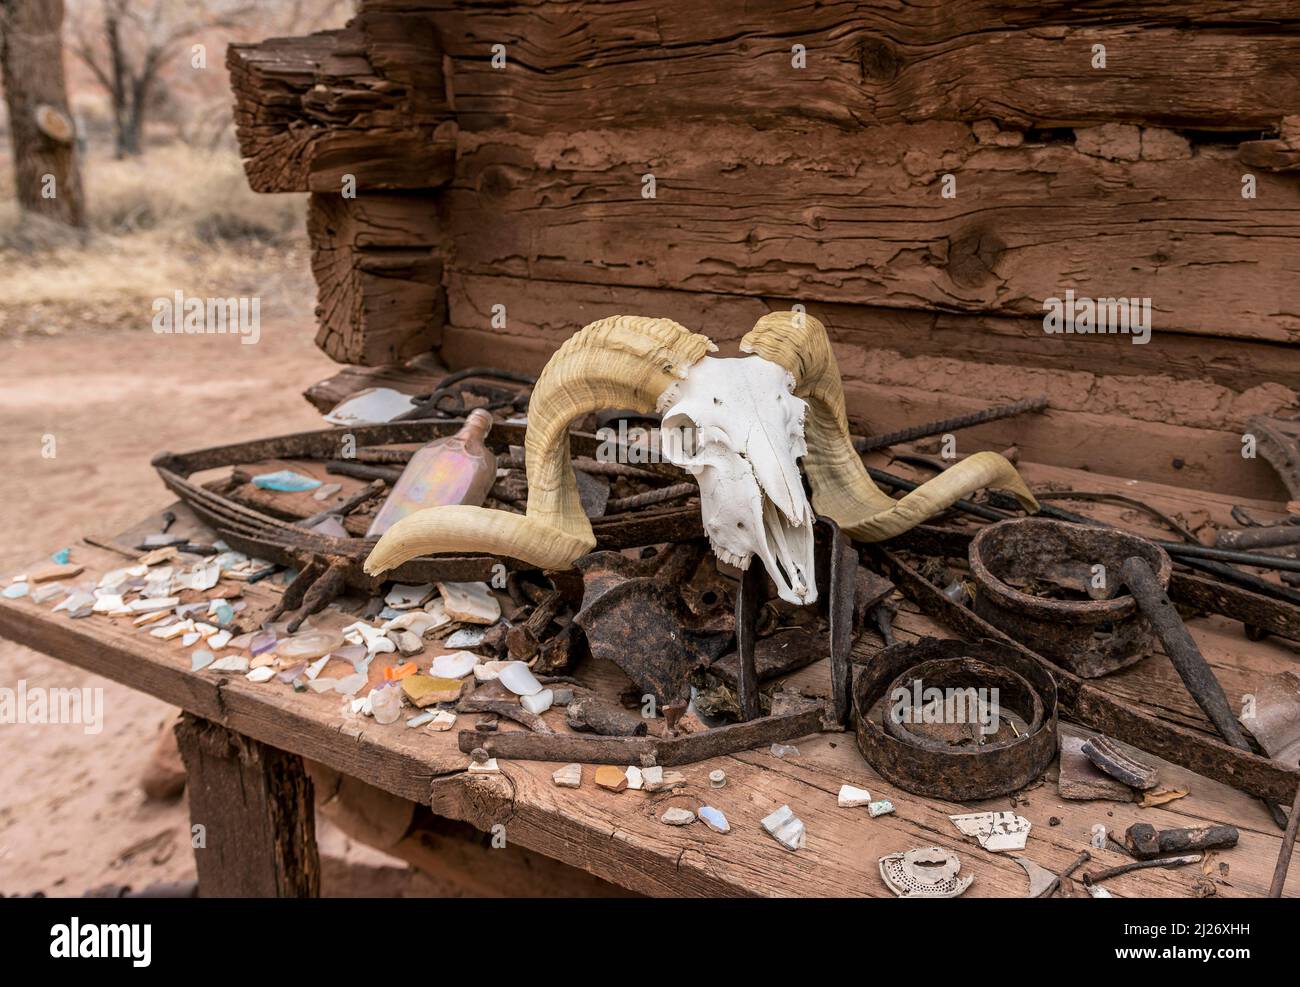 Big Horn Ram Skull On Table With Old Tools Stock Photo